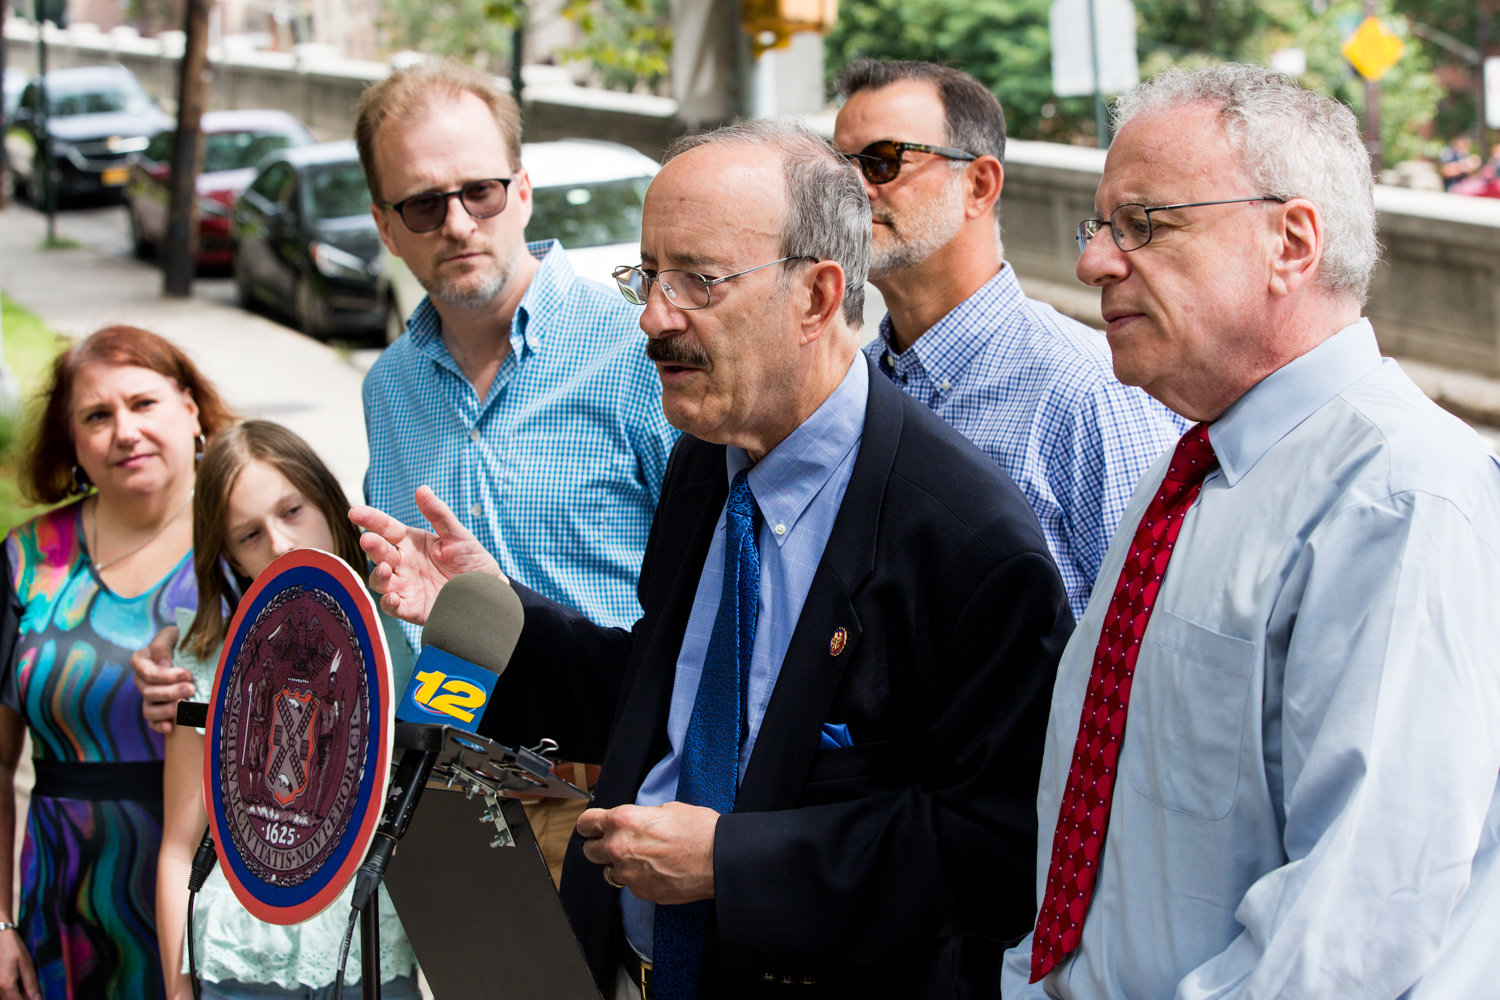 U.S. Rep. Eliot Engel, center, and Assemblyman Jeffrey Dinowitz, right, seen here at a 2019 press conference, held a virtual town hall last week over the video conferencing program Zoom.